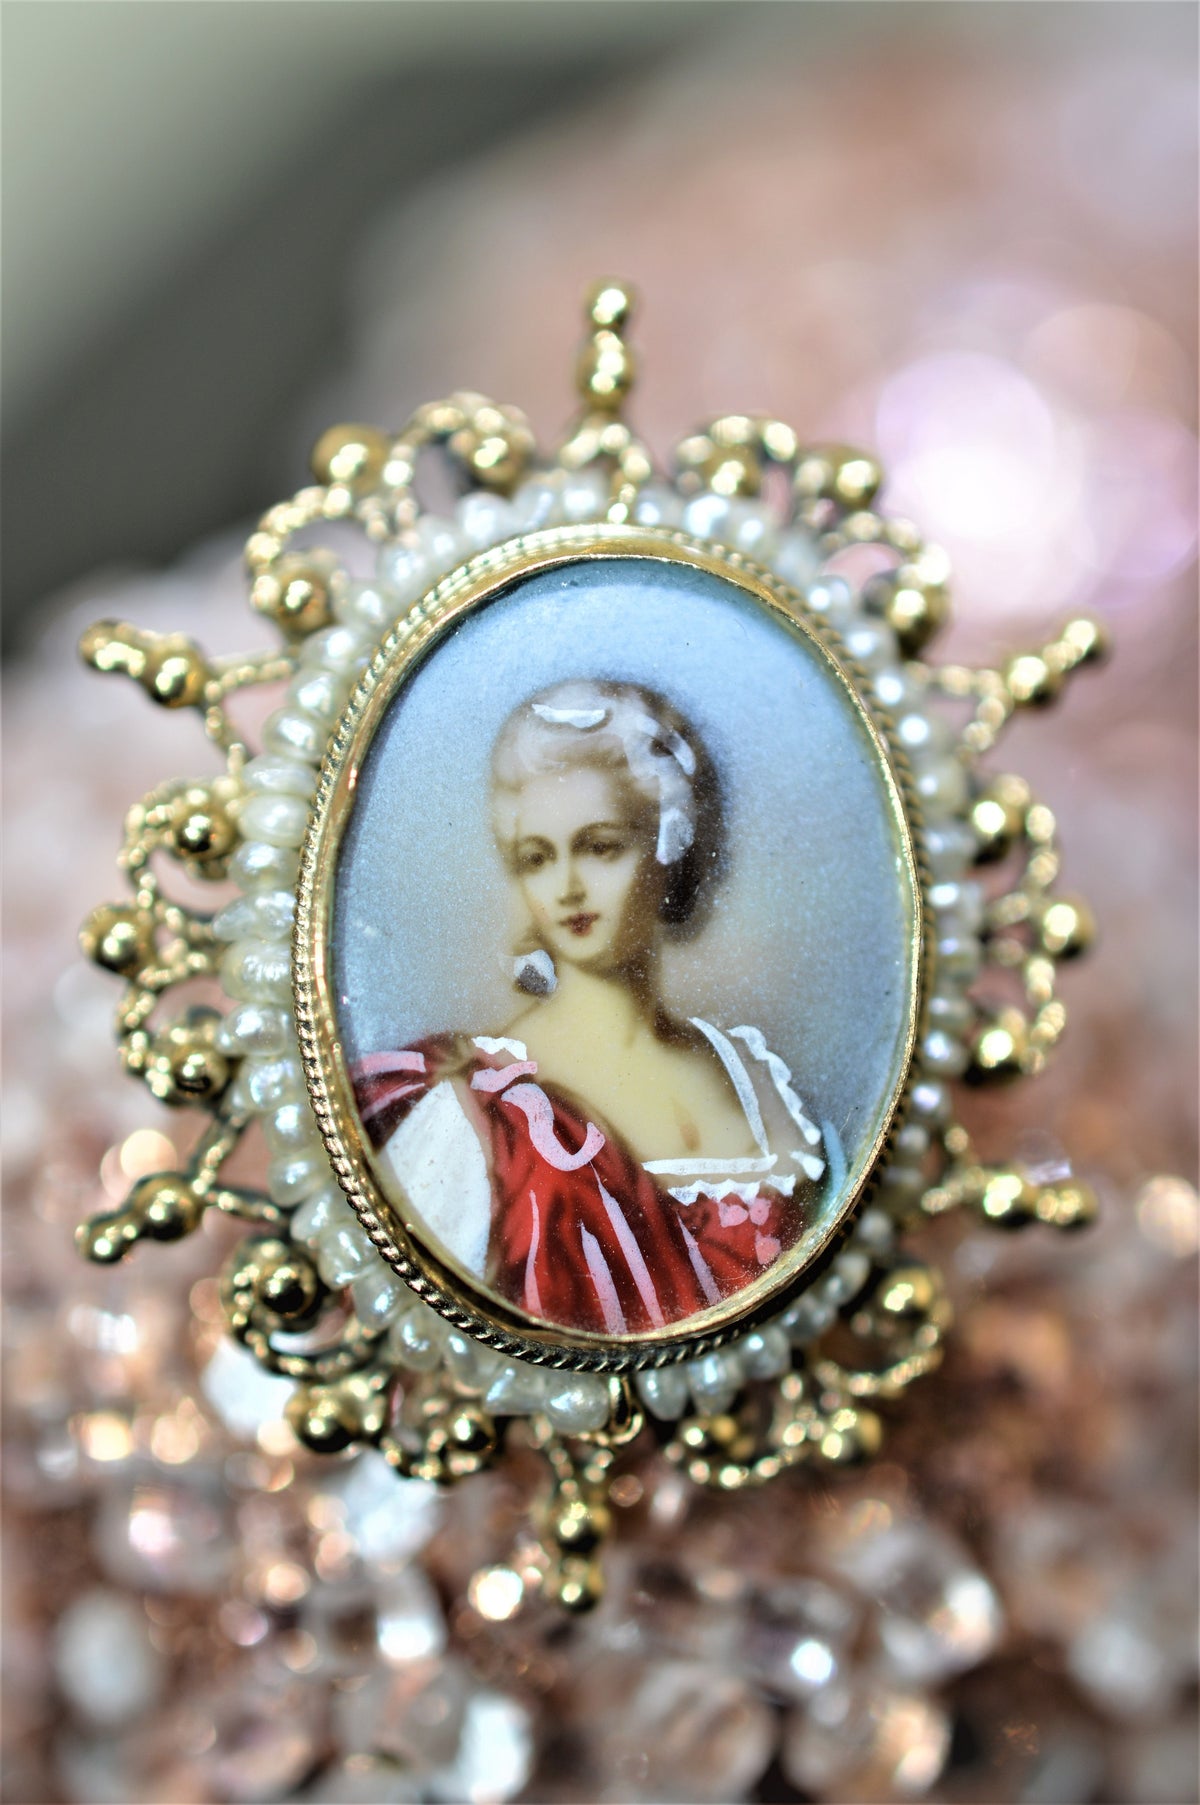 14K Yellow Gold Oval Victorian Hand Painted Portrait Brooch